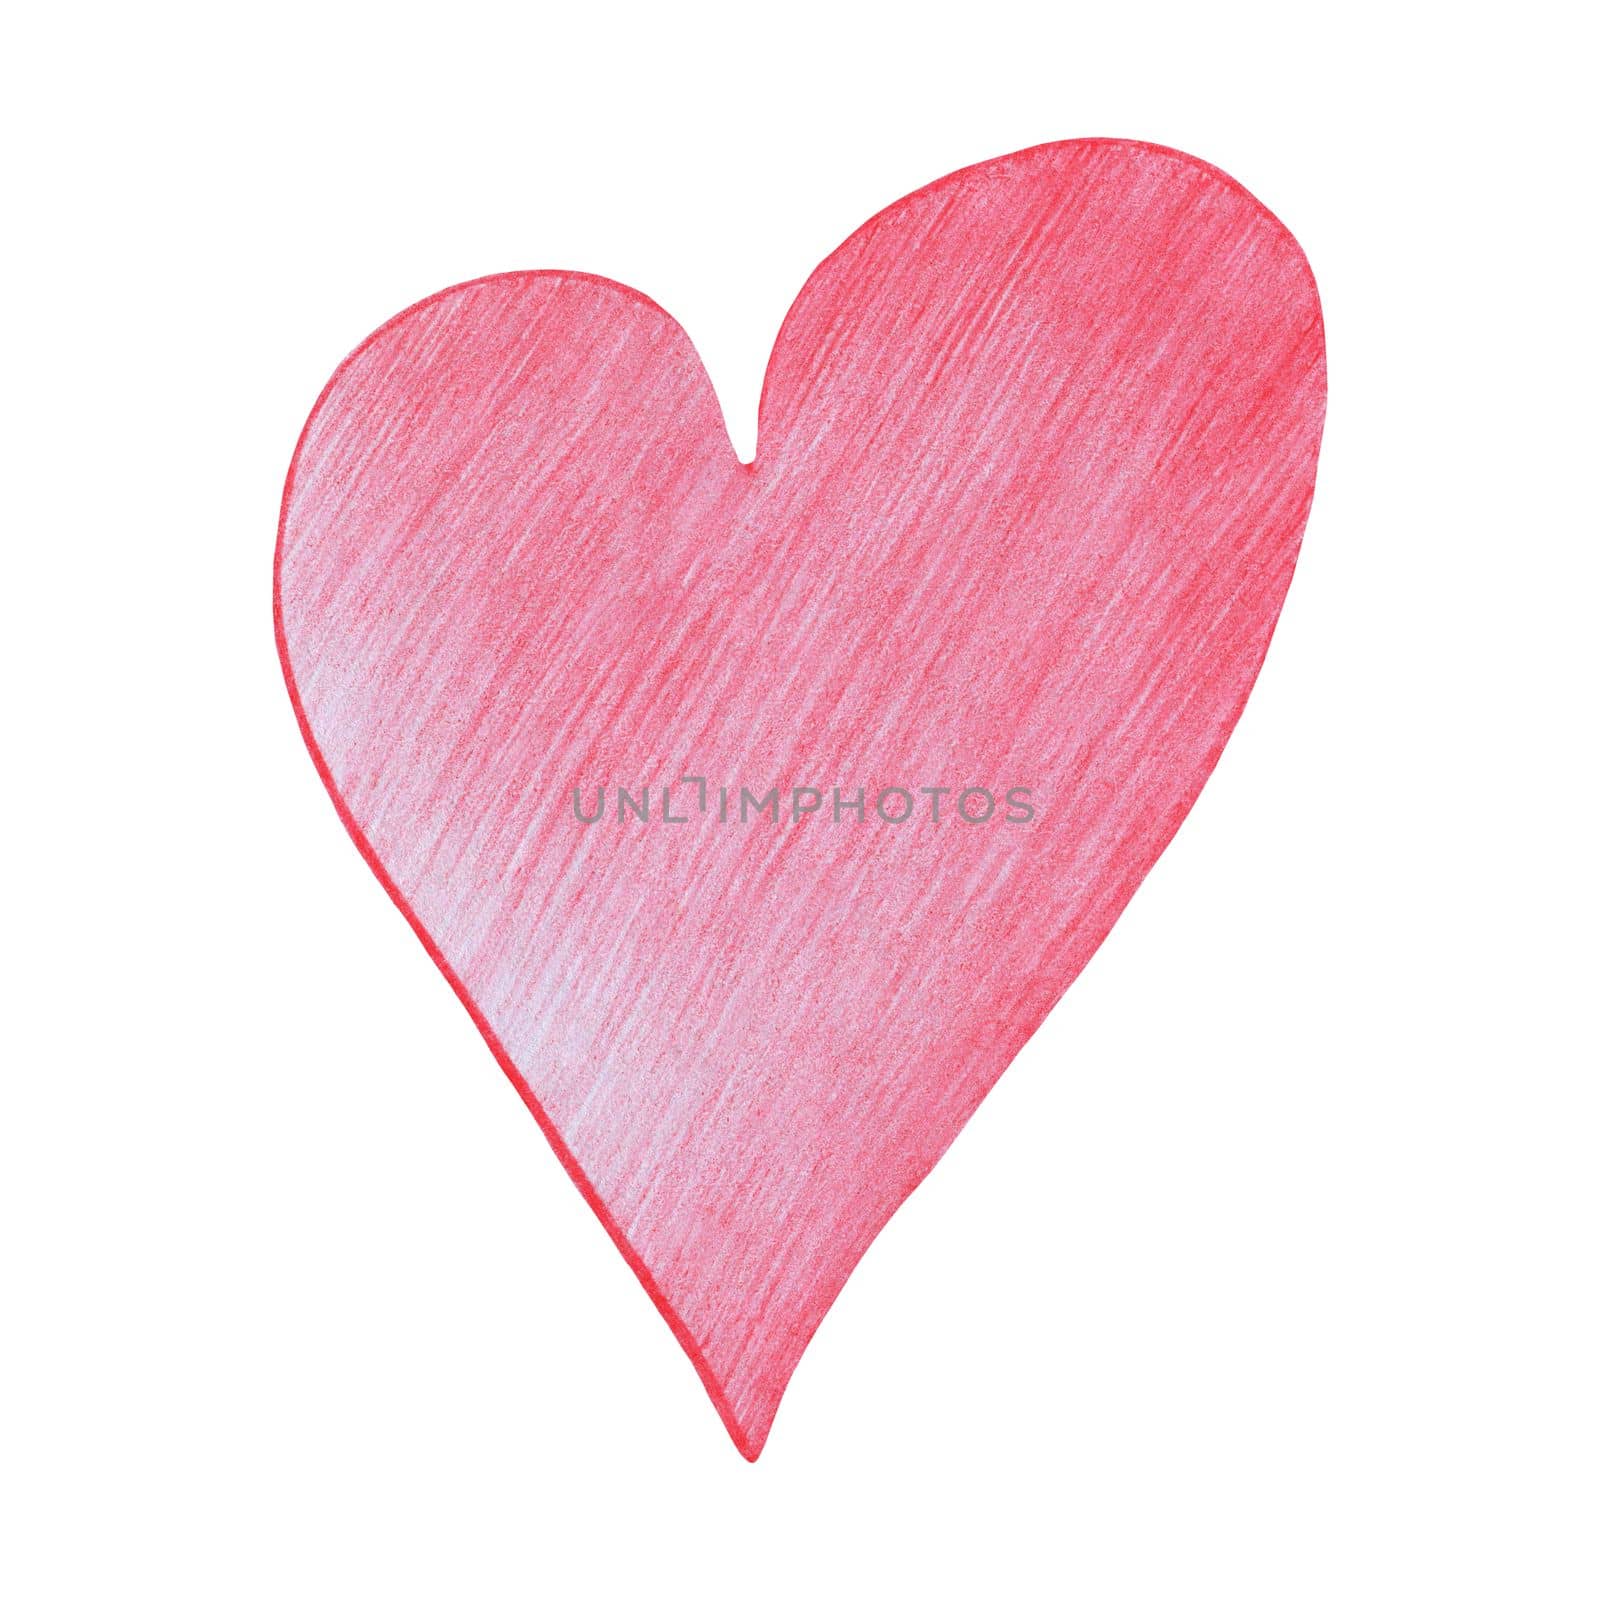 Red Heart Drawn by Colored Pencil. Heart Shape Isolated on White Background. by Rina_Dozornaya